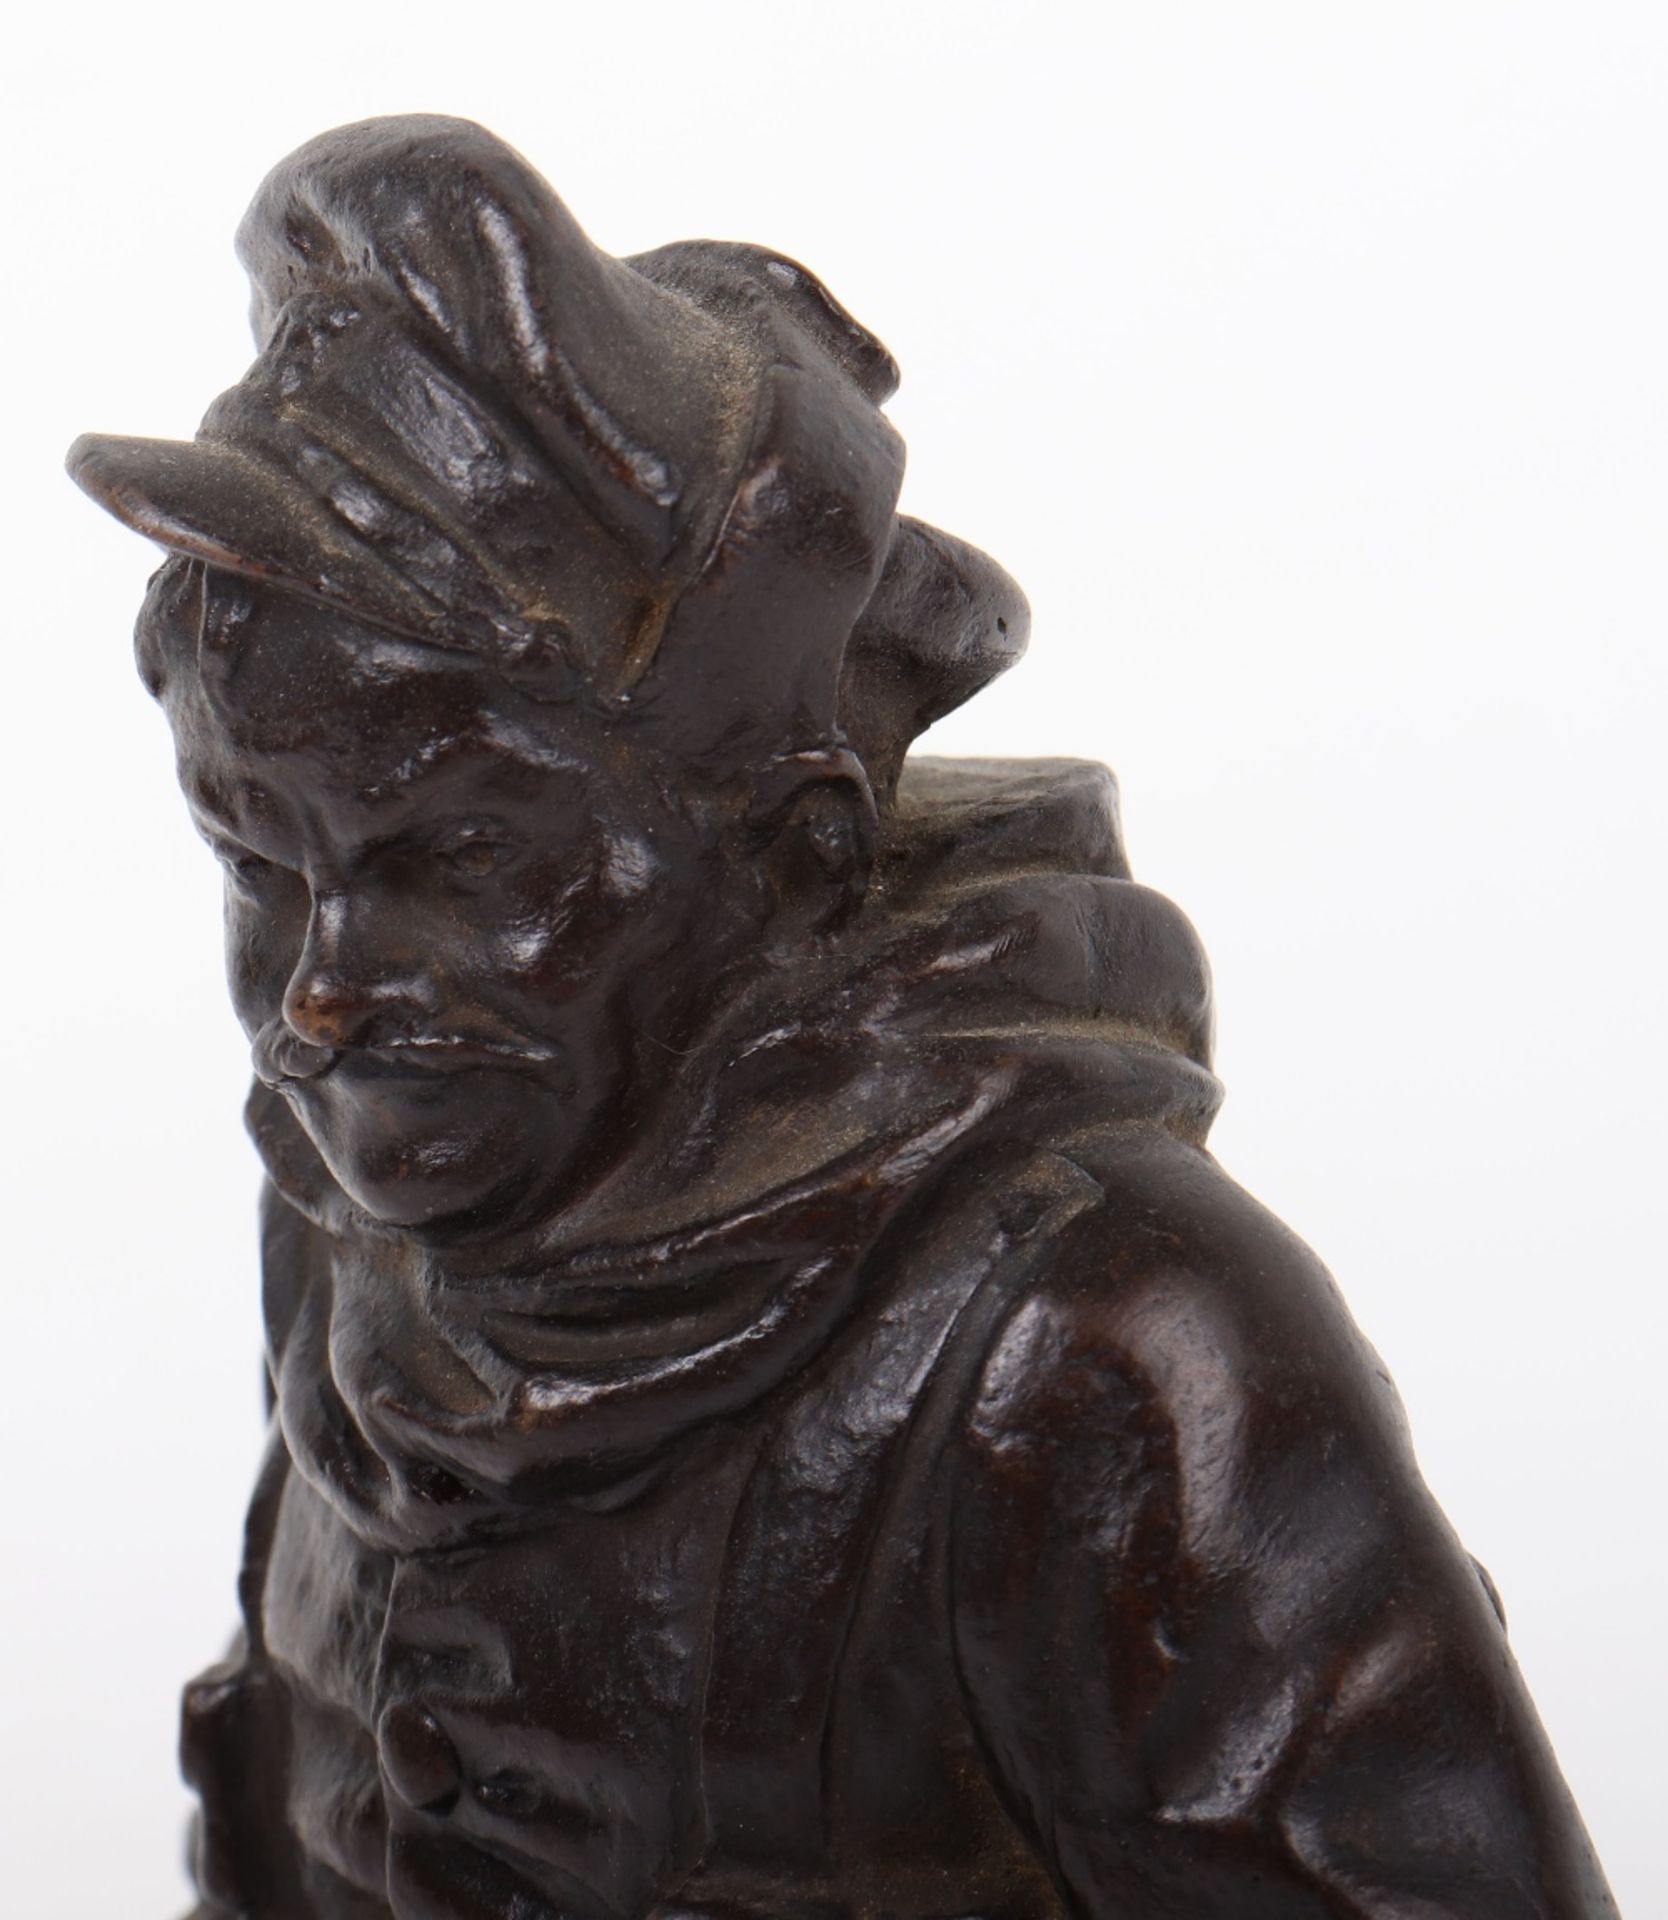 Bronze Figure of a WW1 British Tommy in the Bruce Bairnsfather “Old Bill” Style - Image 6 of 7